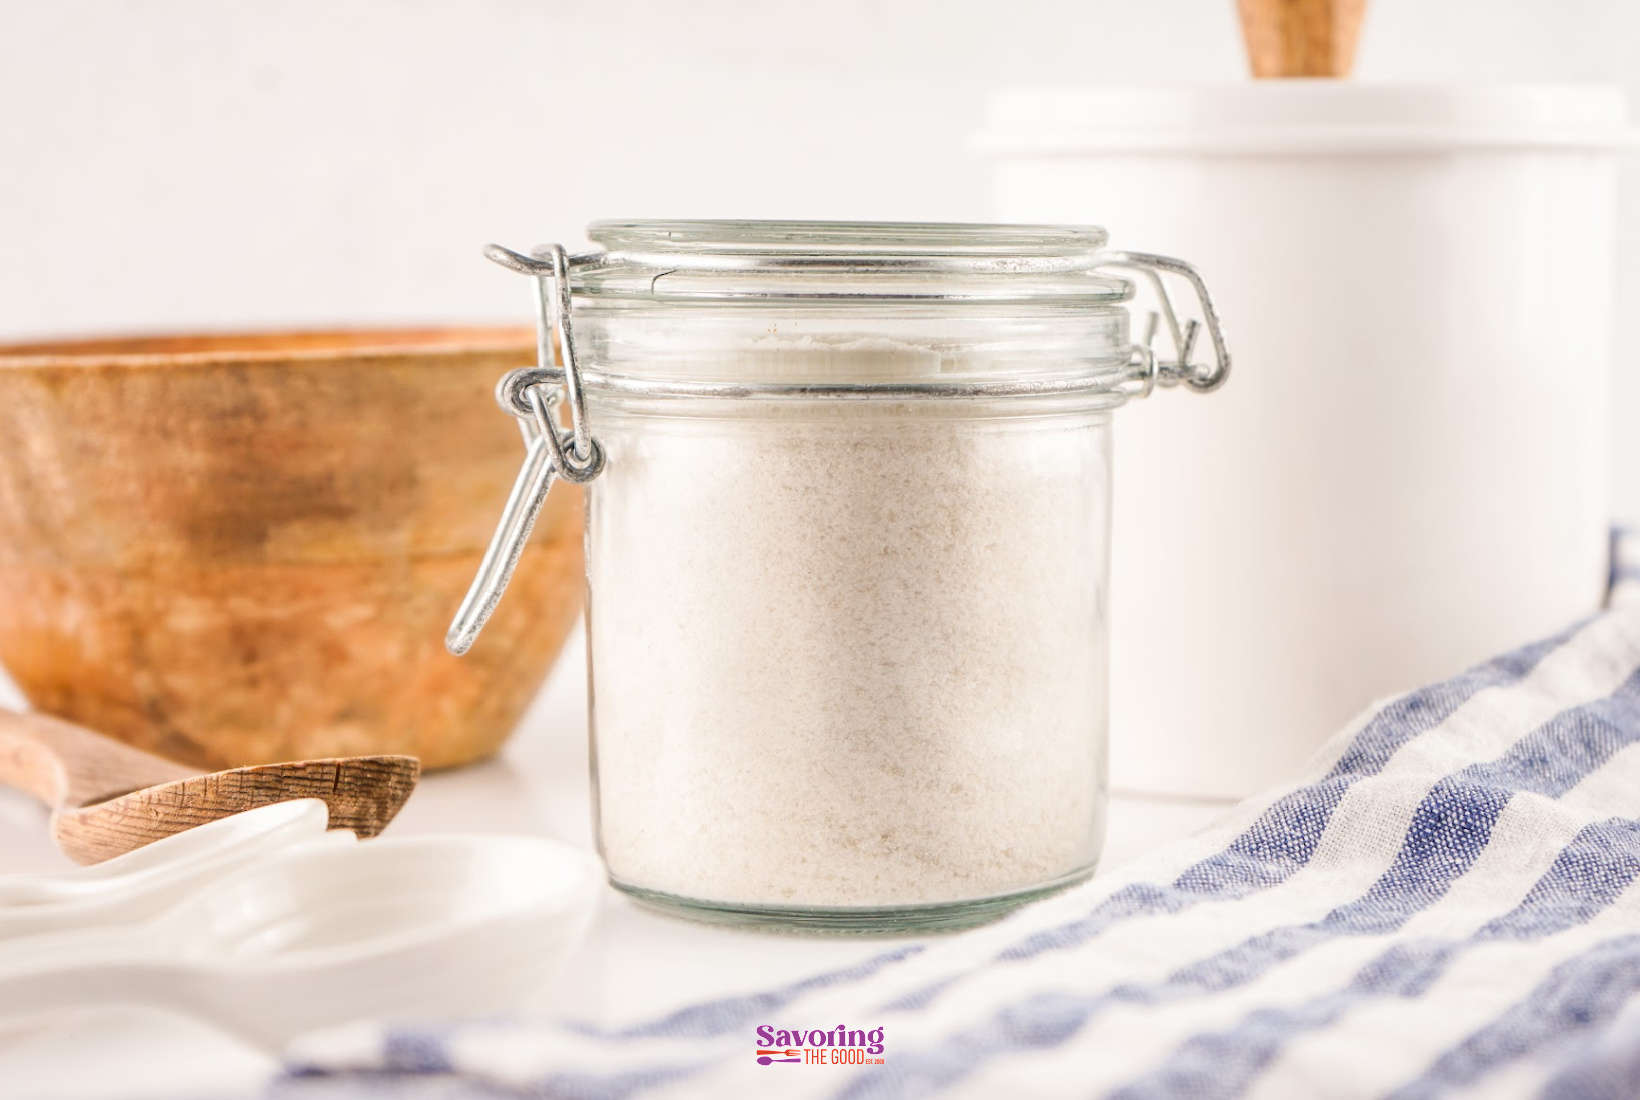 A jar of rice flour next to a spoon and a wooden spoon.